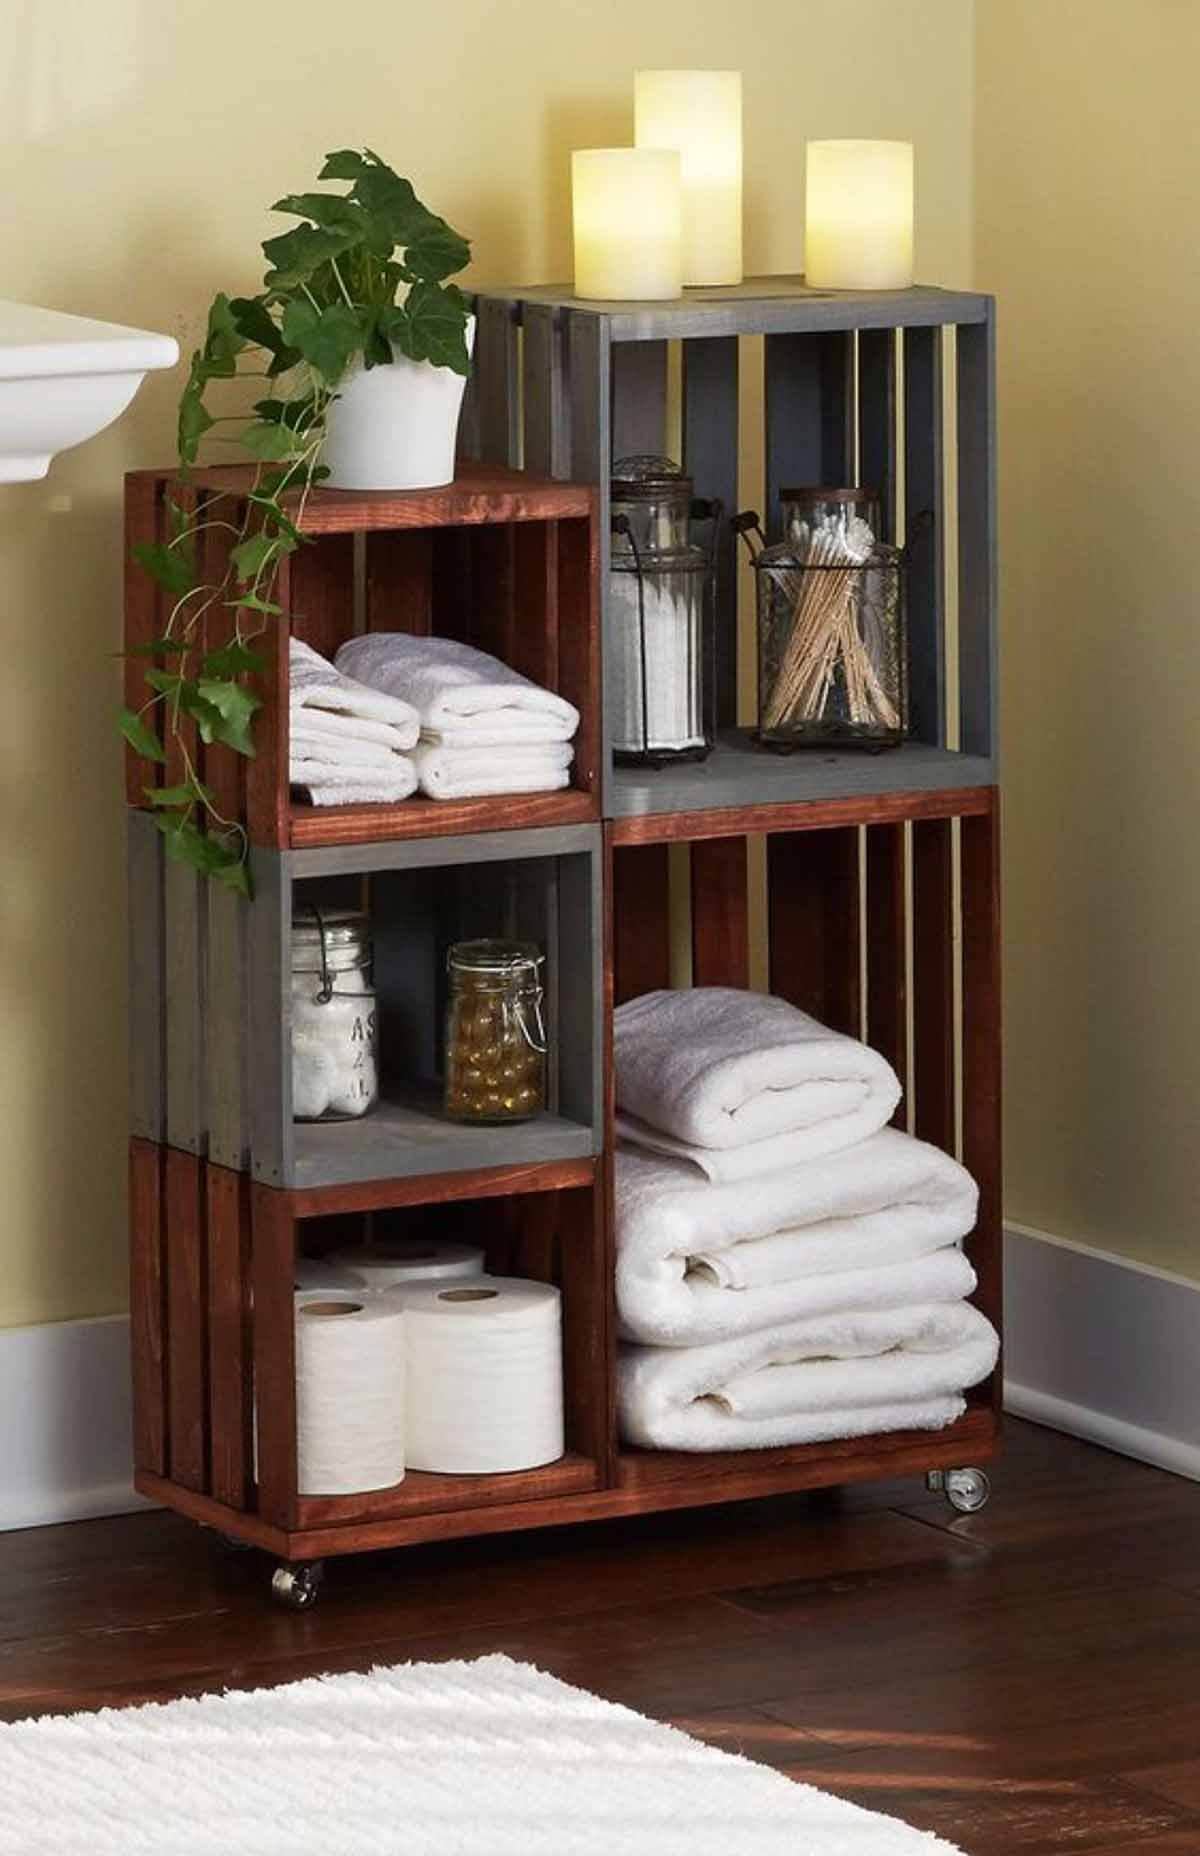 Pallet project ideas to decorate the bathroom - 69